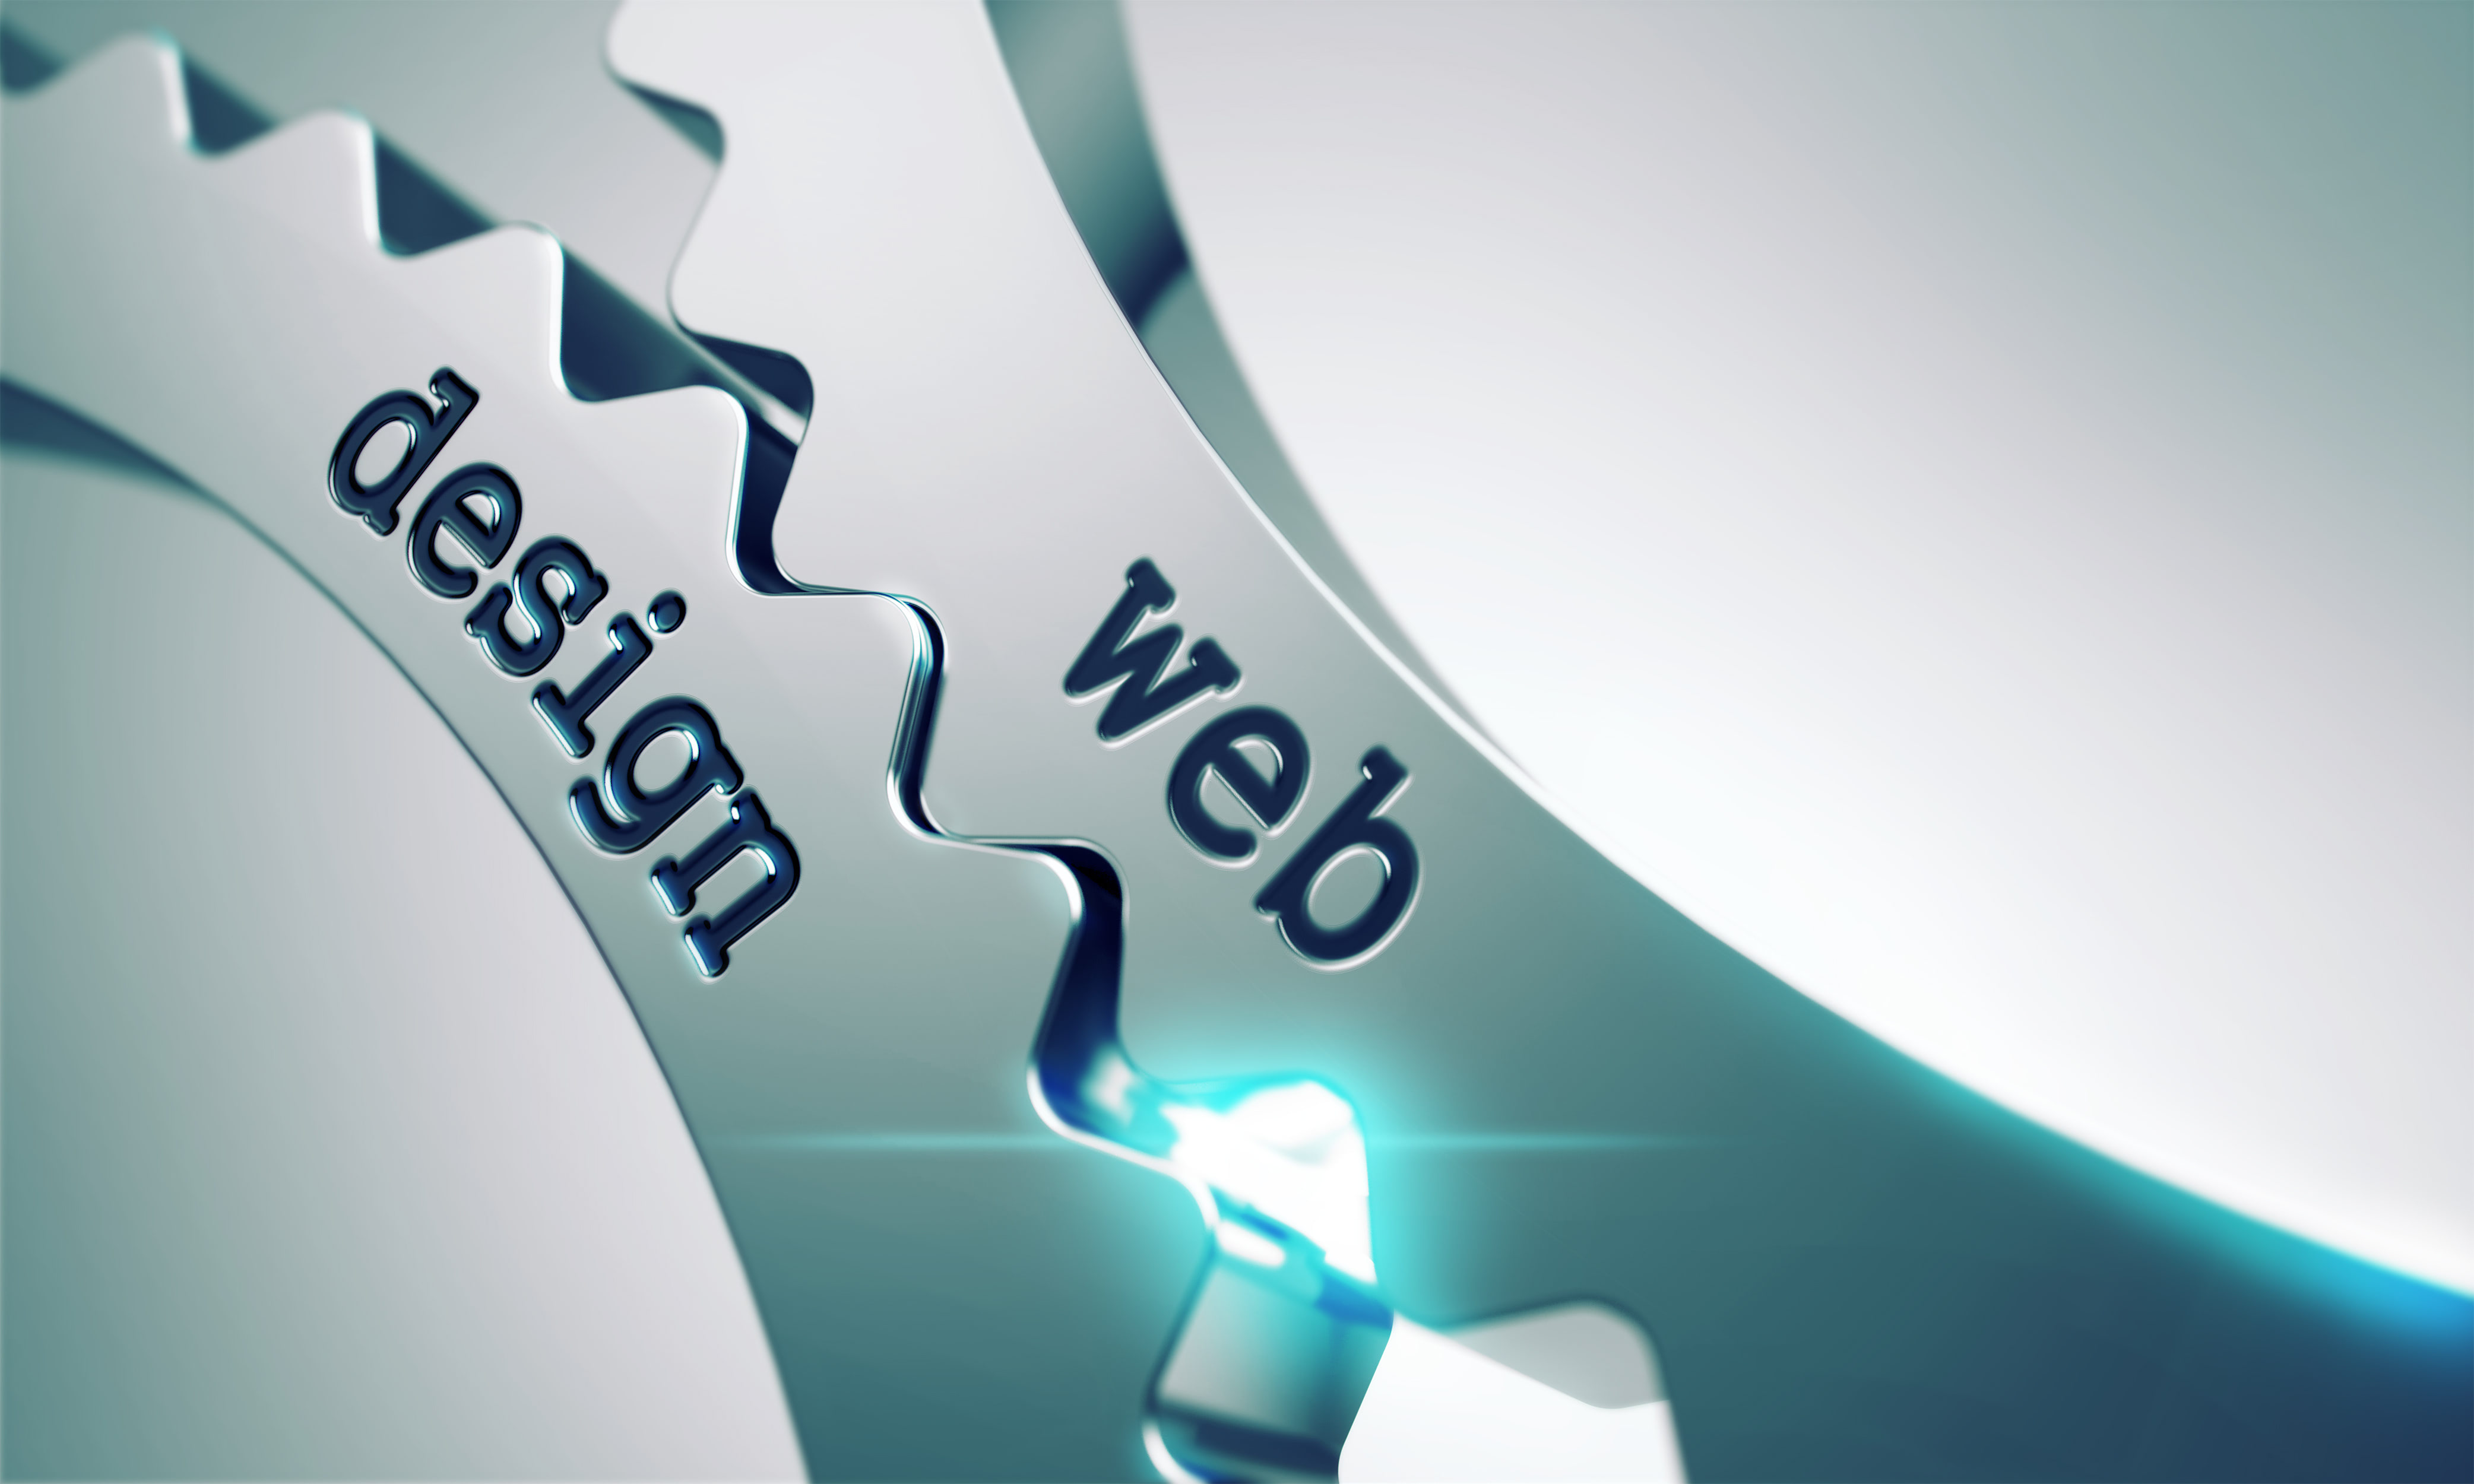 3 Fantastic Items for Your Web Design Toolkit